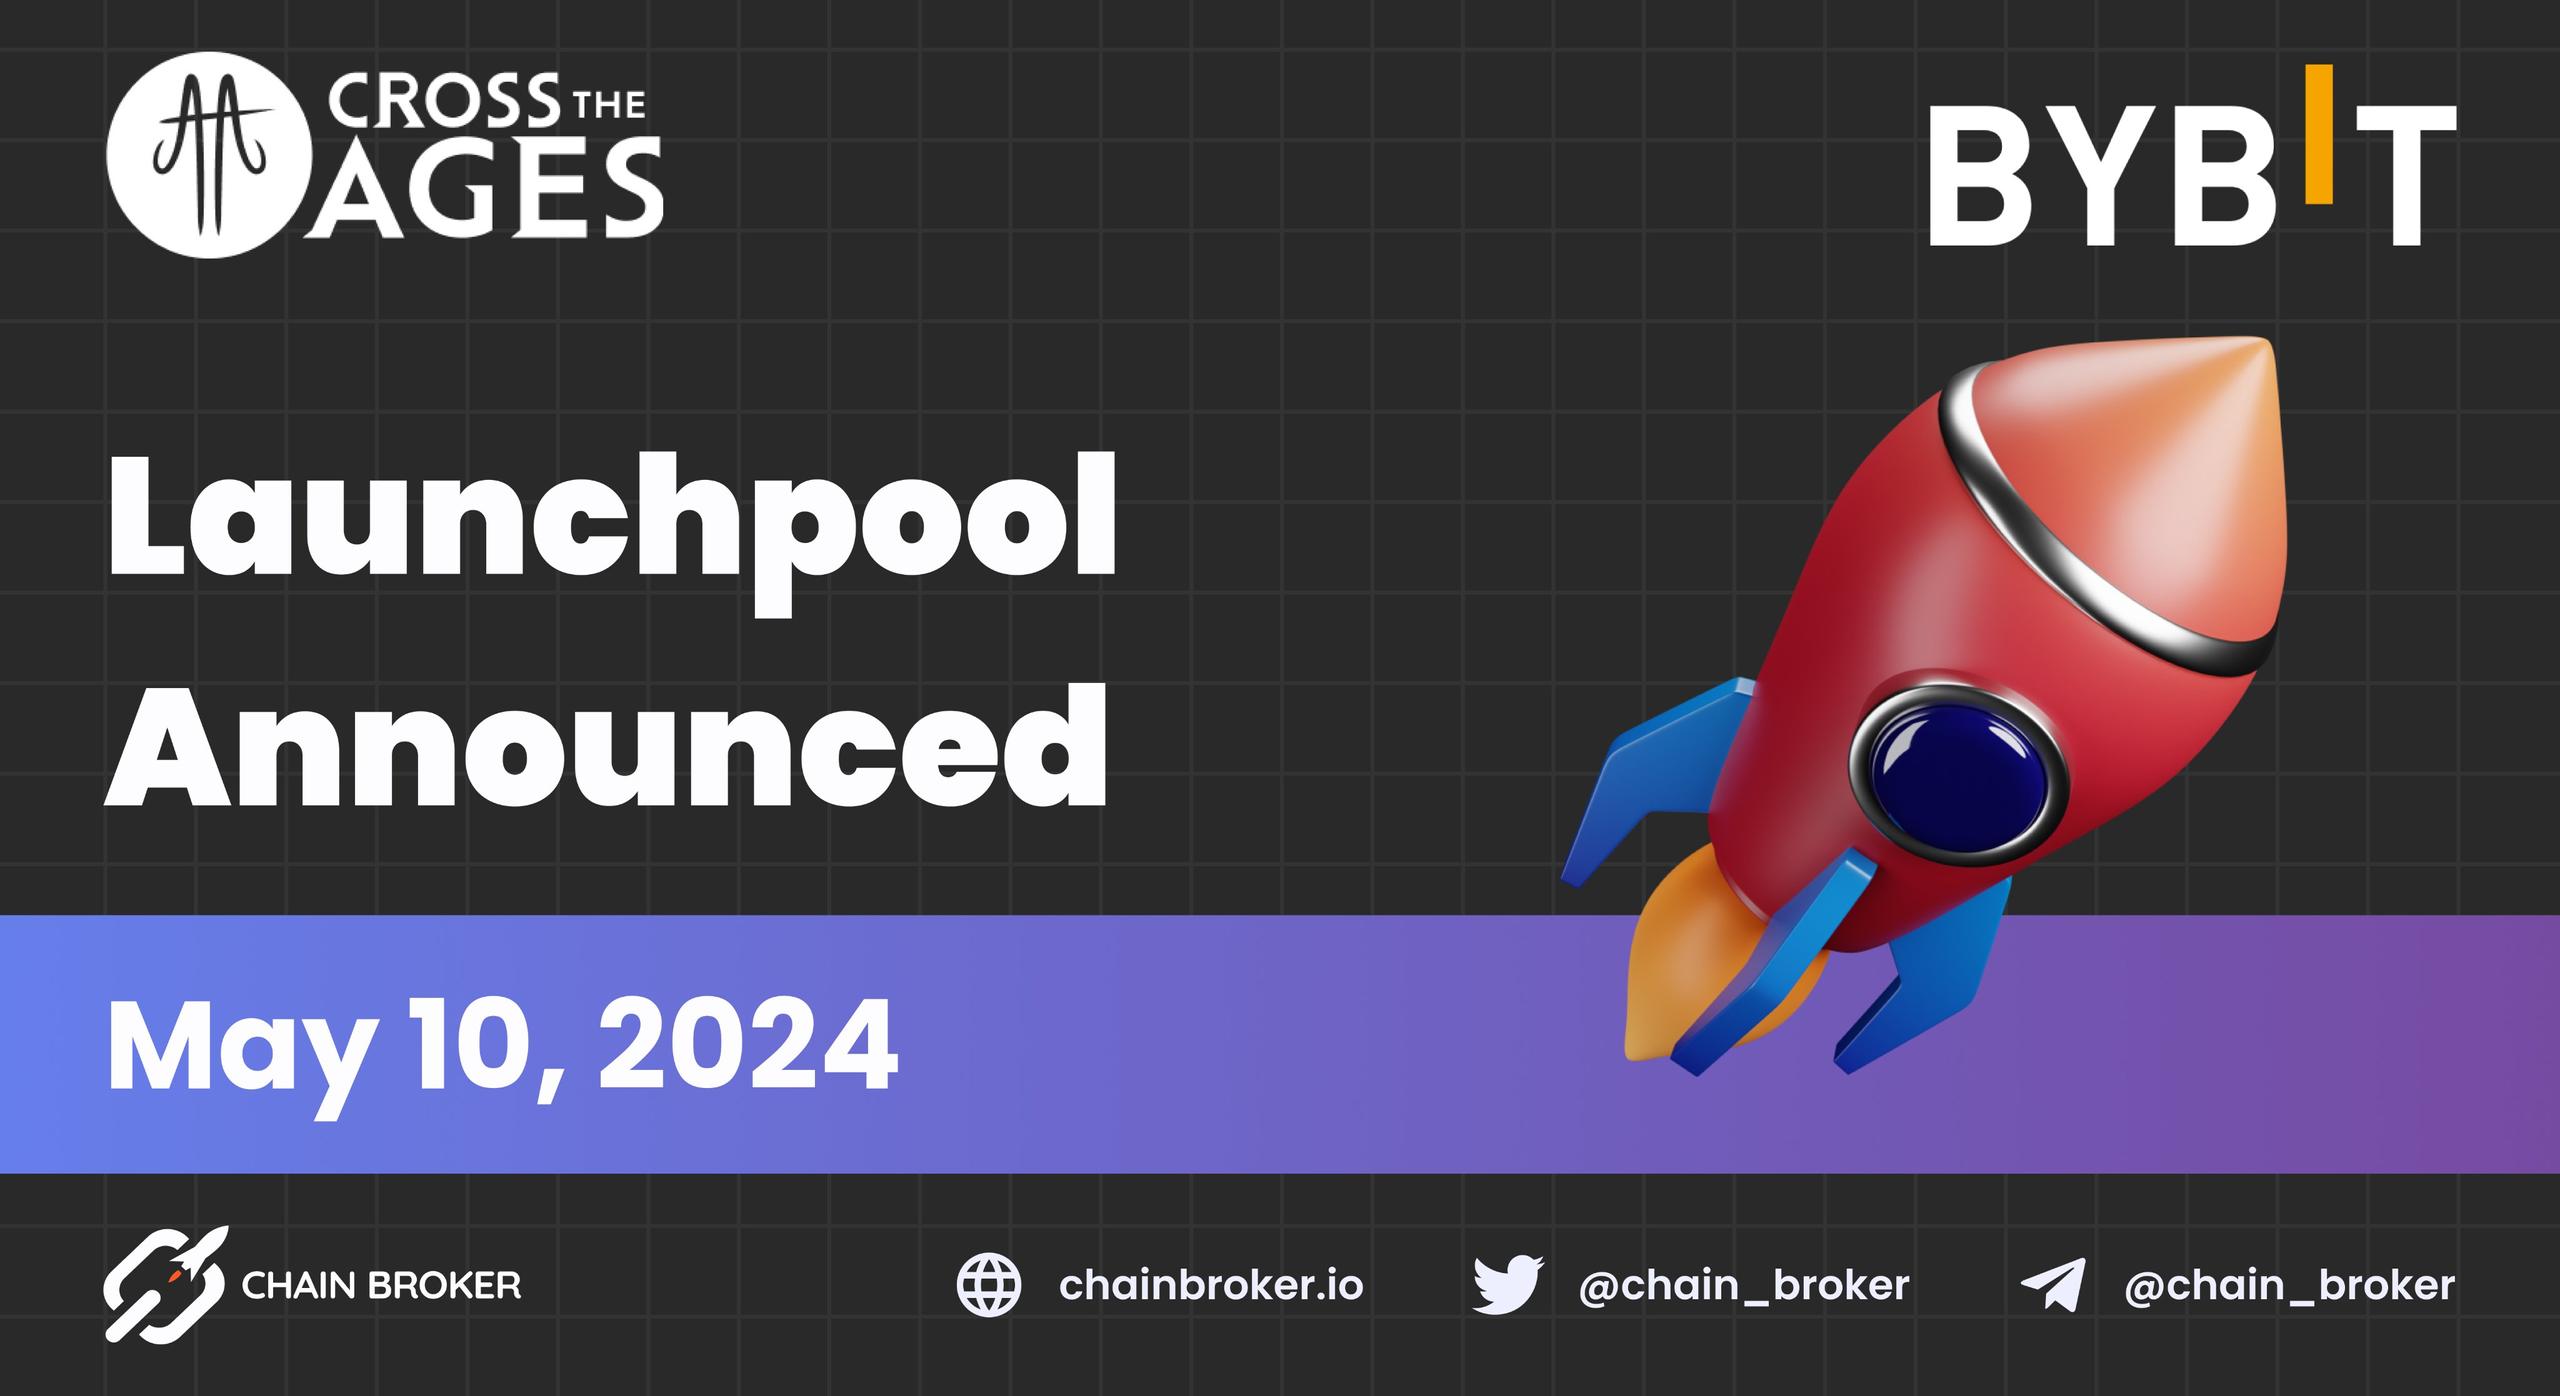 Cross The Ages Launchpool on Bybit Announced